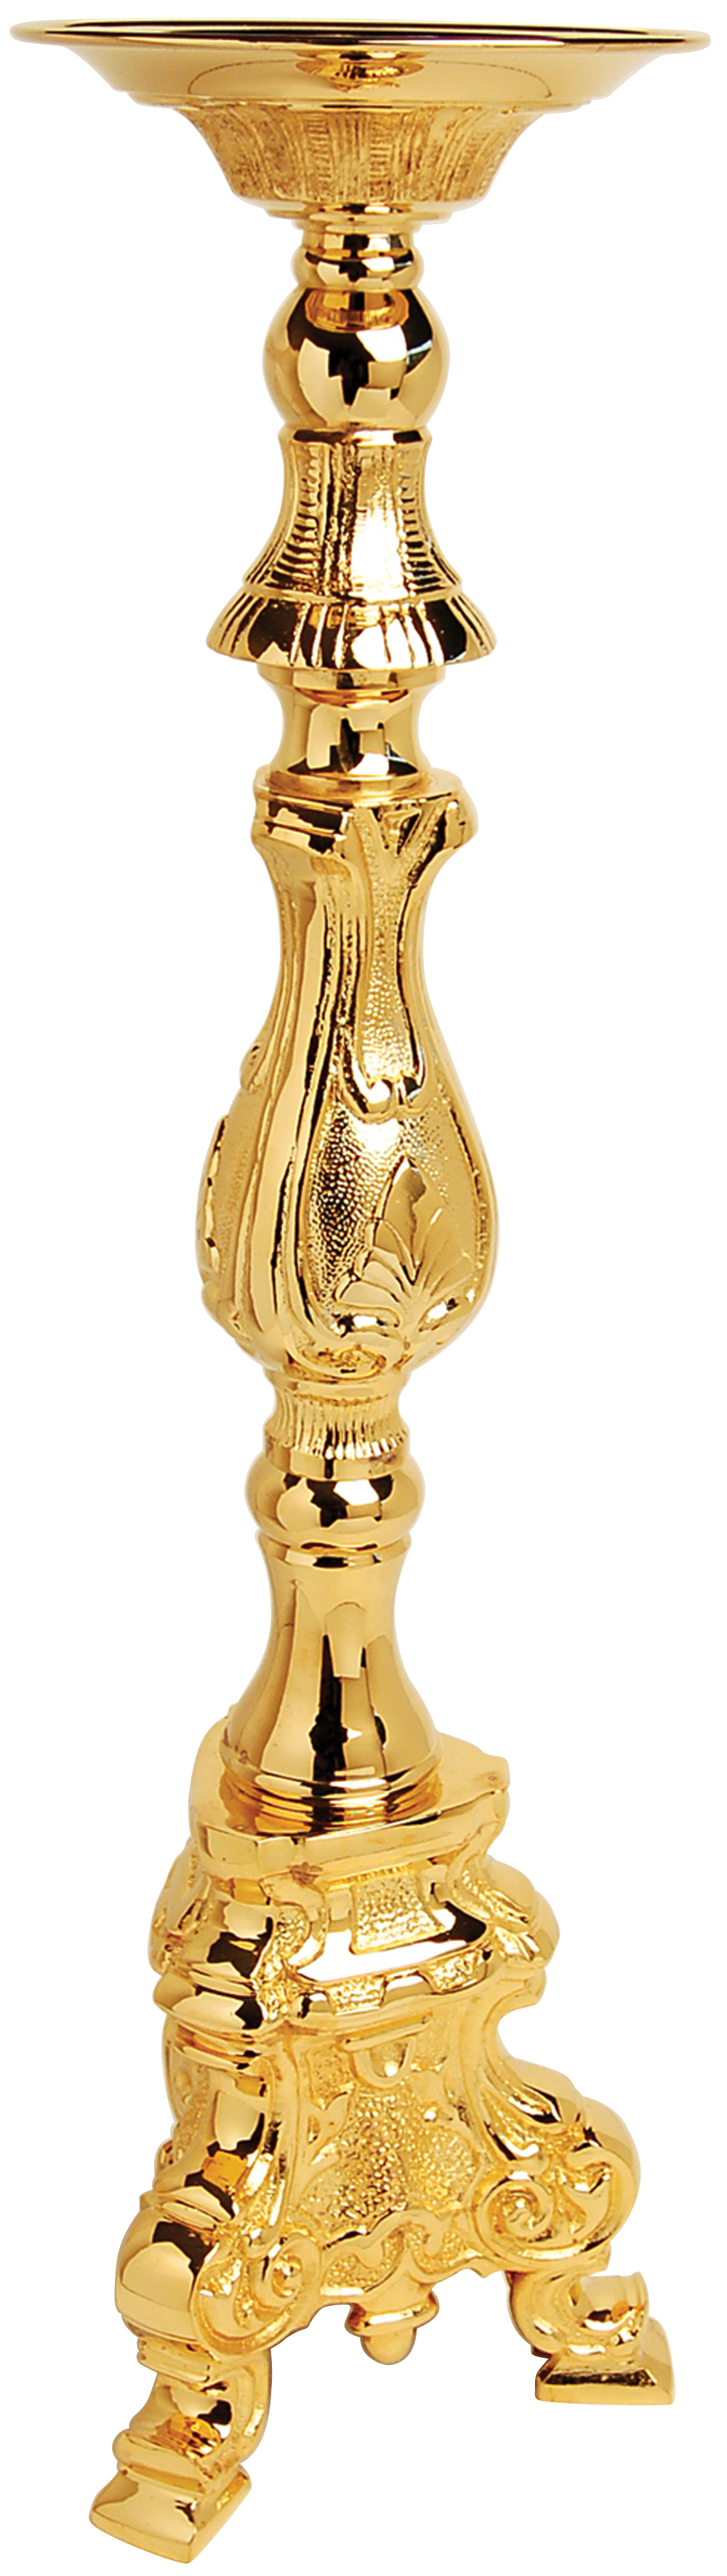 Candlestick 27 3/4 inch 24K Gold Plate 1 1/2 inch Socket